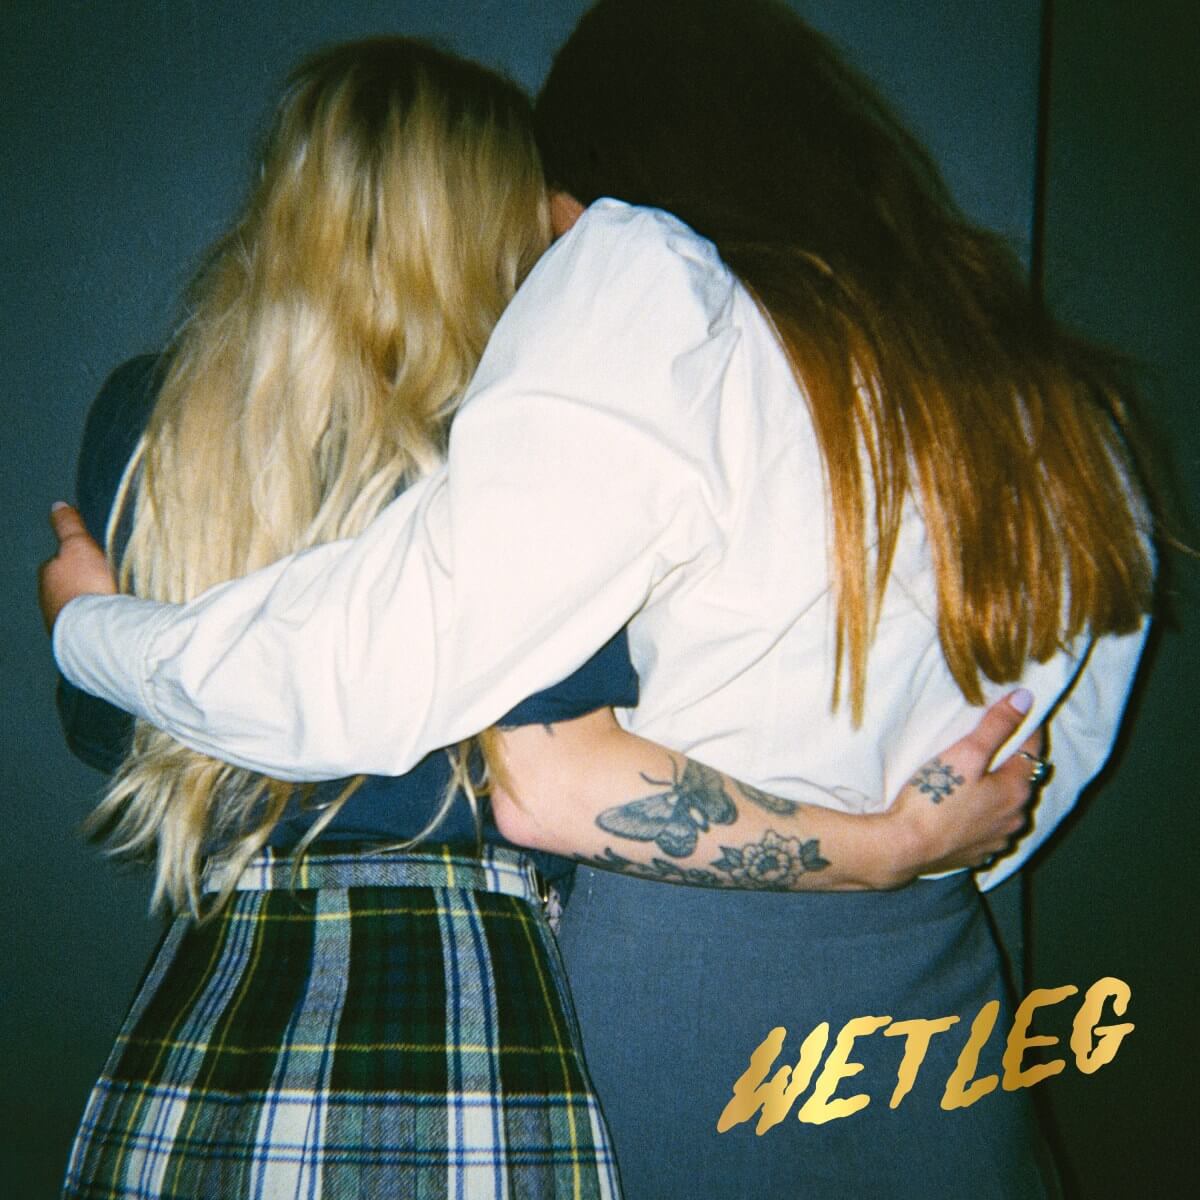 Wet Leg by Wet Leg album review by Mimi Kenny for Northern Transmissions